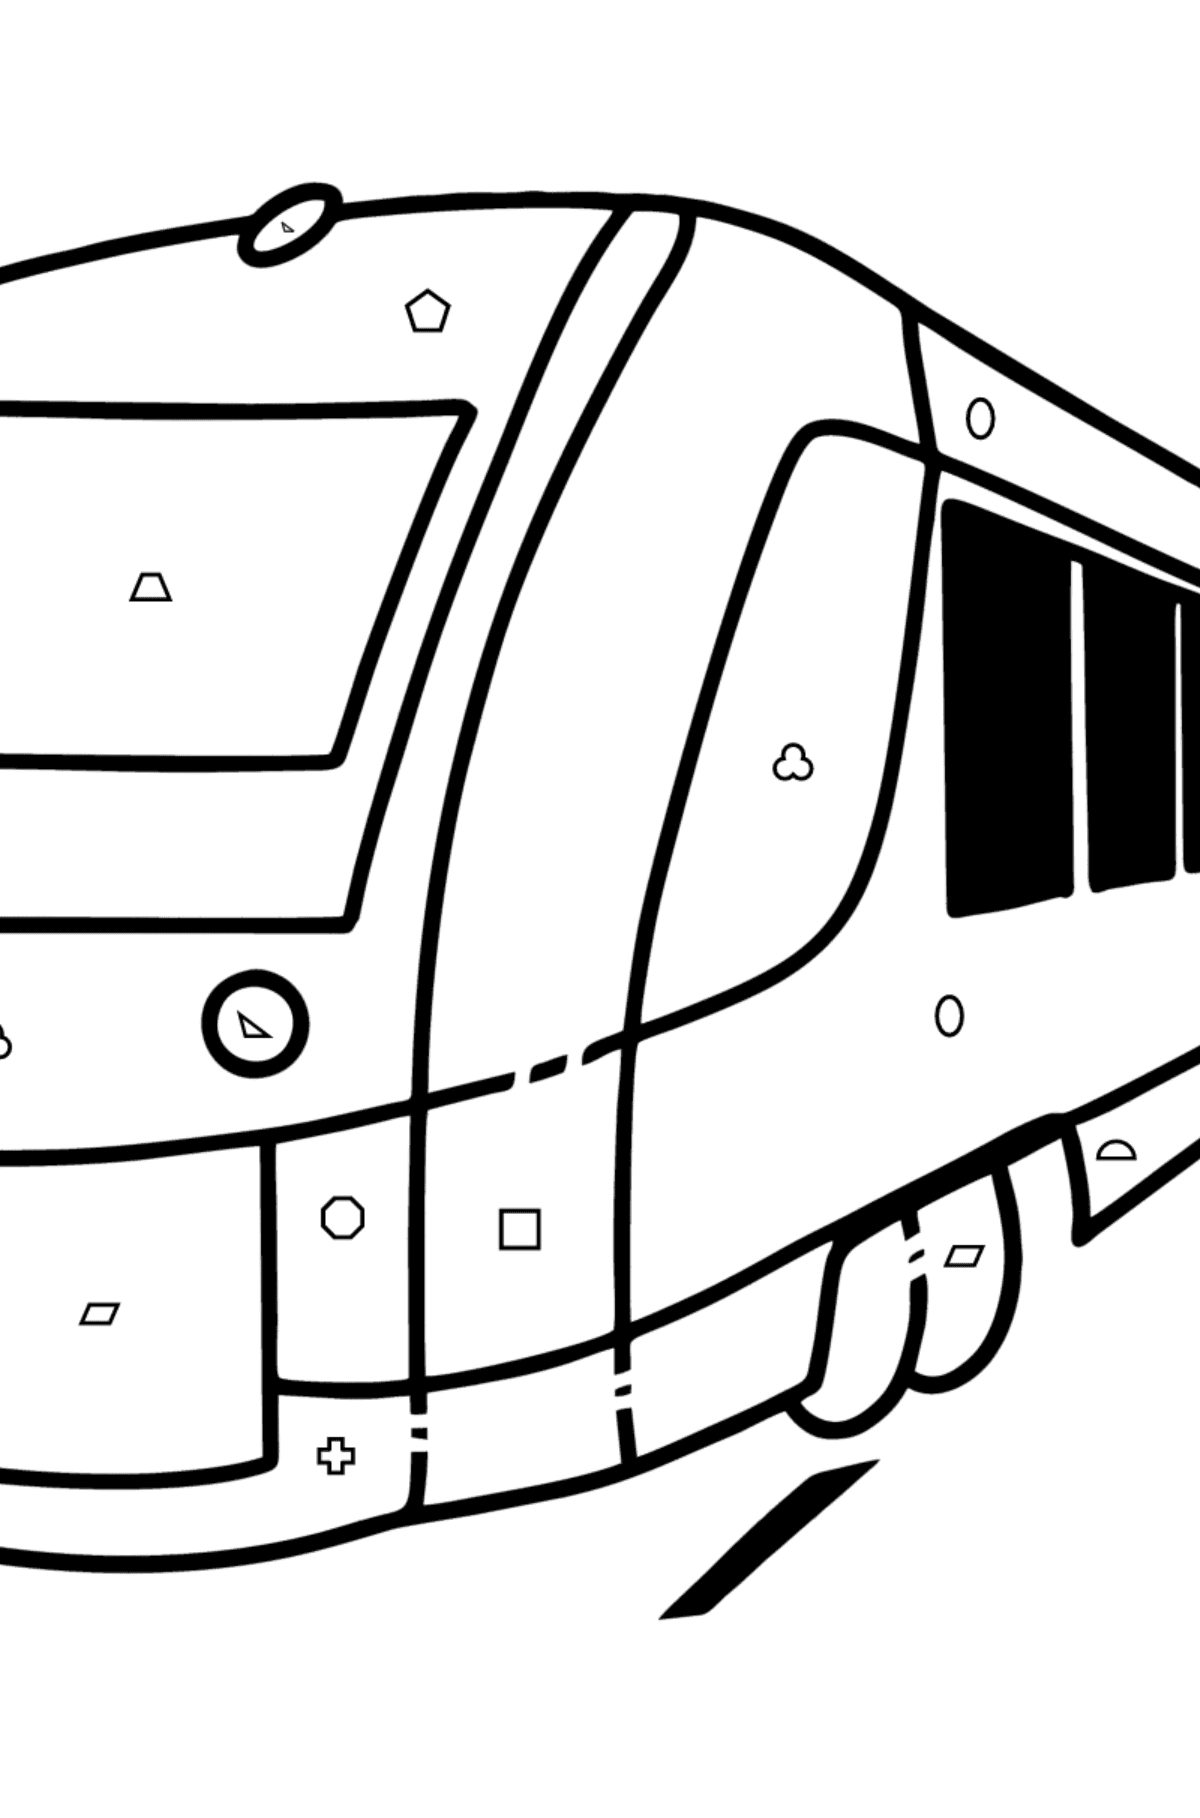 City Train coloring page - Coloring by Geometric Shapes for Kids